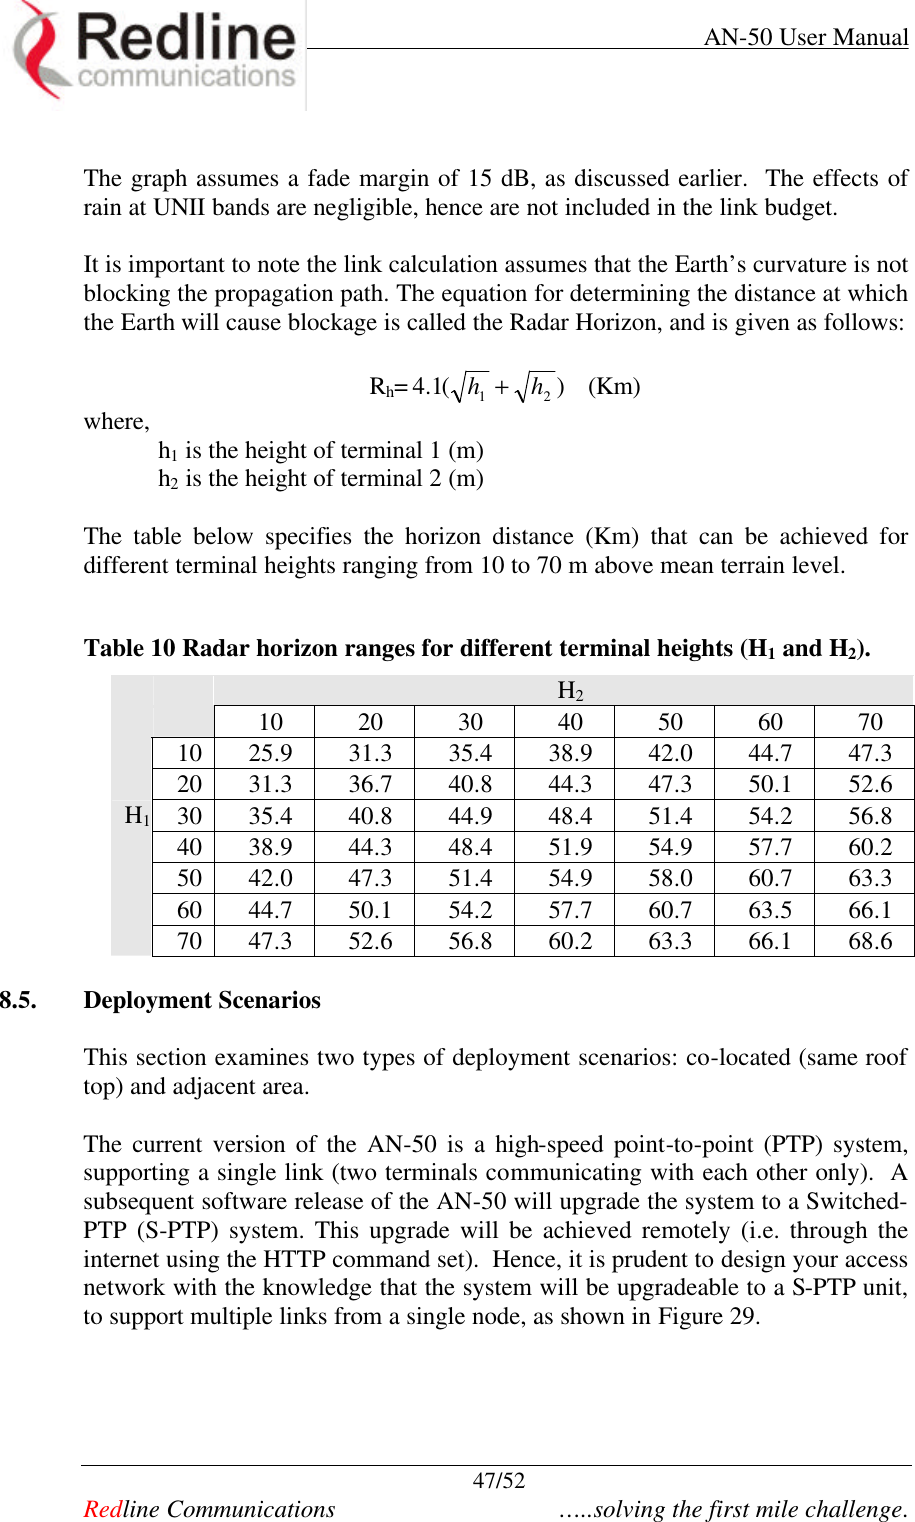     AN-50 User Manual  47/52   Redline Communications    …..solving the first mile challenge.  The graph assumes a fade margin of 15 dB, as discussed earlier.  The effects of rain at UNII bands are negligible, hence are not included in the link budget.     It is important to note the link calculation assumes that the Earth’s curvature is not blocking the propagation path. The equation for determining the distance at which the Earth will cause blockage is called the Radar Horizon, and is given as follows:  Rh=)(1.421 hh +   (Km) where, h1 is the height of terminal 1 (m) h2 is the height of terminal 2 (m)  The table below specifies the horizon distance (Km) that can be achieved for different terminal heights ranging from 10 to 70 m above mean terrain level.  Table 10 Radar horizon ranges for different terminal heights (H1 and H2).  H2  10 20 30 40 50 60 70 10 25.9 31.3 35.4 38.9 42.0 44.7 47.3 20 31.3 36.7 40.8 44.3 47.3 50.1 52.6 30 35.4 40.8 44.9 48.4 51.4 54.2 56.8 40 38.9 44.3 48.4 51.9 54.9 57.7 60.2 50 42.0 47.3 51.4 54.9 58.0 60.7 63.3 60 44.7 50.1 54.2 57.7 60.7 63.5 66.1 H170 47.3 52.6 56.8 60.2 63.3 66.1 68.6  8.5. Deployment Scenarios  This section examines two types of deployment scenarios: co-located (same roof top) and adjacent area.   The current version of the AN-50 is a high-speed point-to-point (PTP) system, supporting a single link (two terminals communicating with each other only).  A subsequent software release of the AN-50 will upgrade the system to a Switched-PTP (S-PTP) system. This upgrade will be achieved remotely (i.e. through the internet using the HTTP command set).  Hence, it is prudent to design your access network with the knowledge that the system will be upgradeable to a S-PTP unit, to support multiple links from a single node, as shown in Figure 29.    